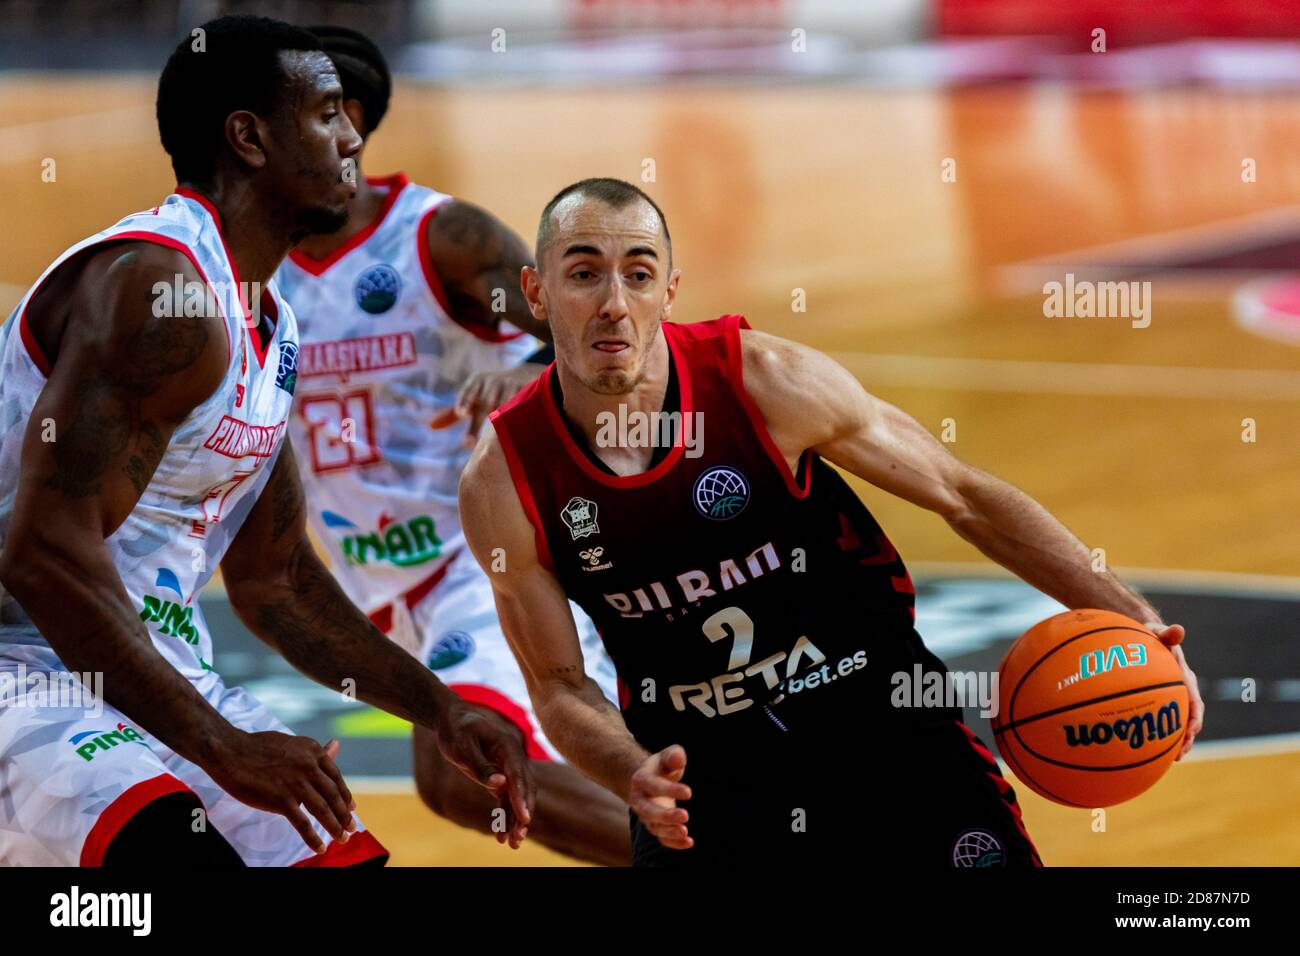 Bilbao, Basque Country, SPAIN. 27th Oct, 2020. October 27, 2020, Bilbao,  Basque Country, SPAIN: JONATHAN ROUSEILLE (2) runs with the ball controlled  during the Basketball Champions League game between Bilbao Basket and